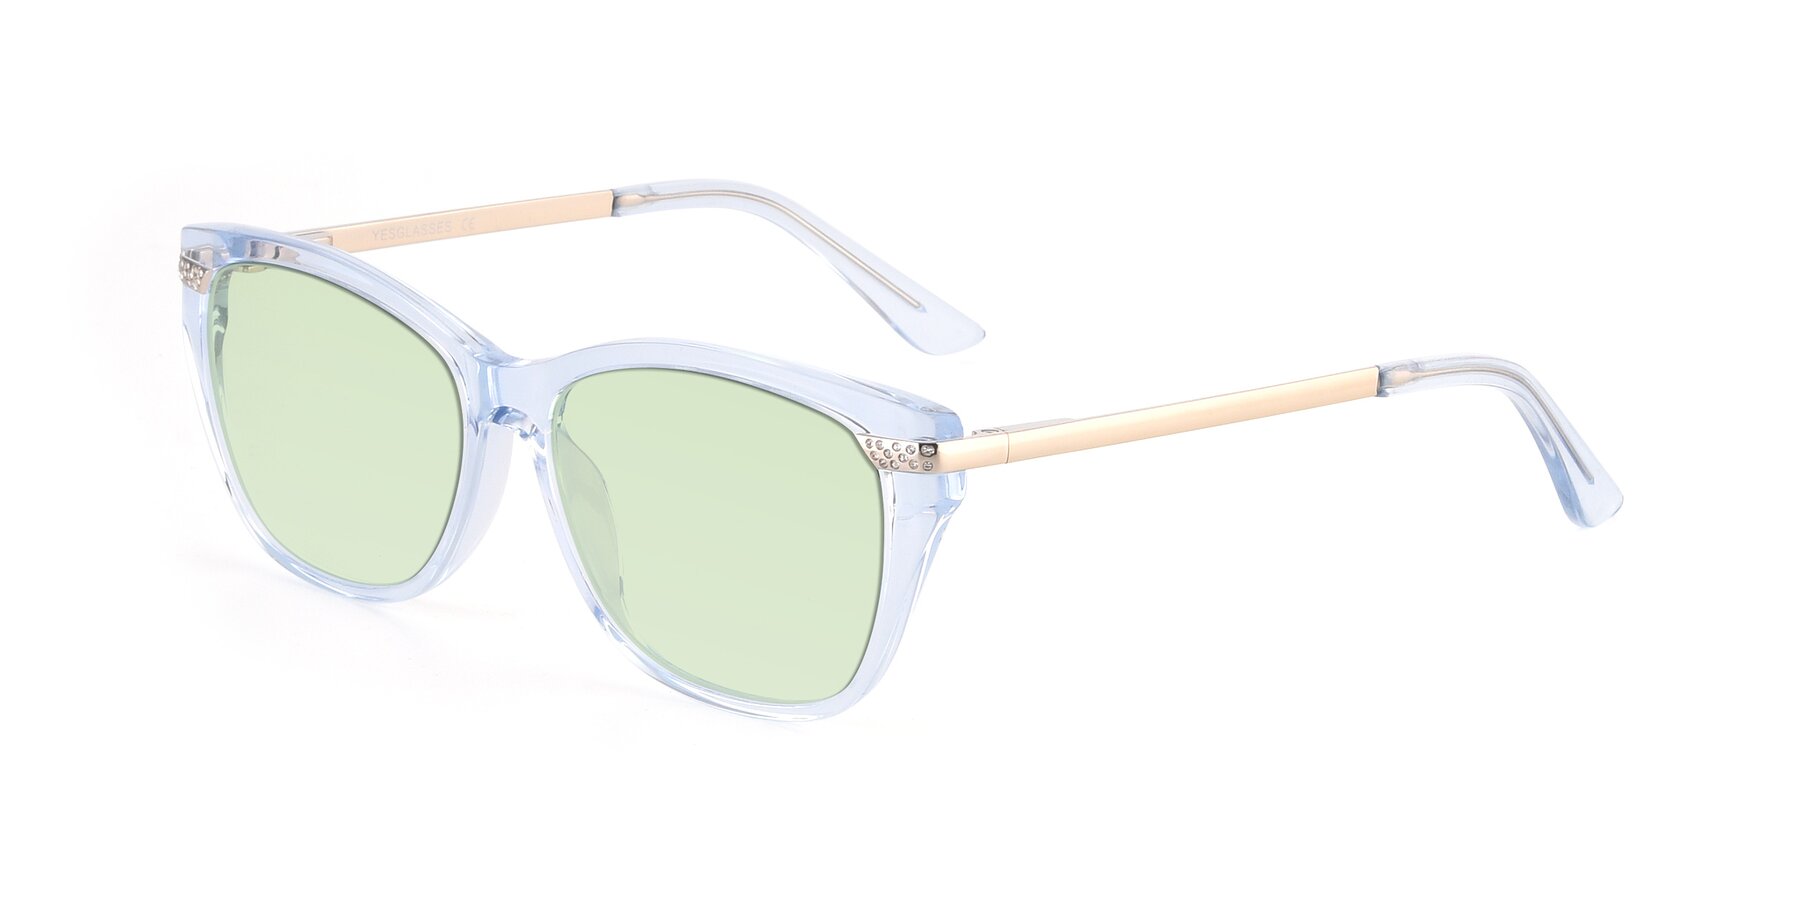 Angle of 17515 in Transparent Blue with Light Green Tinted Lenses